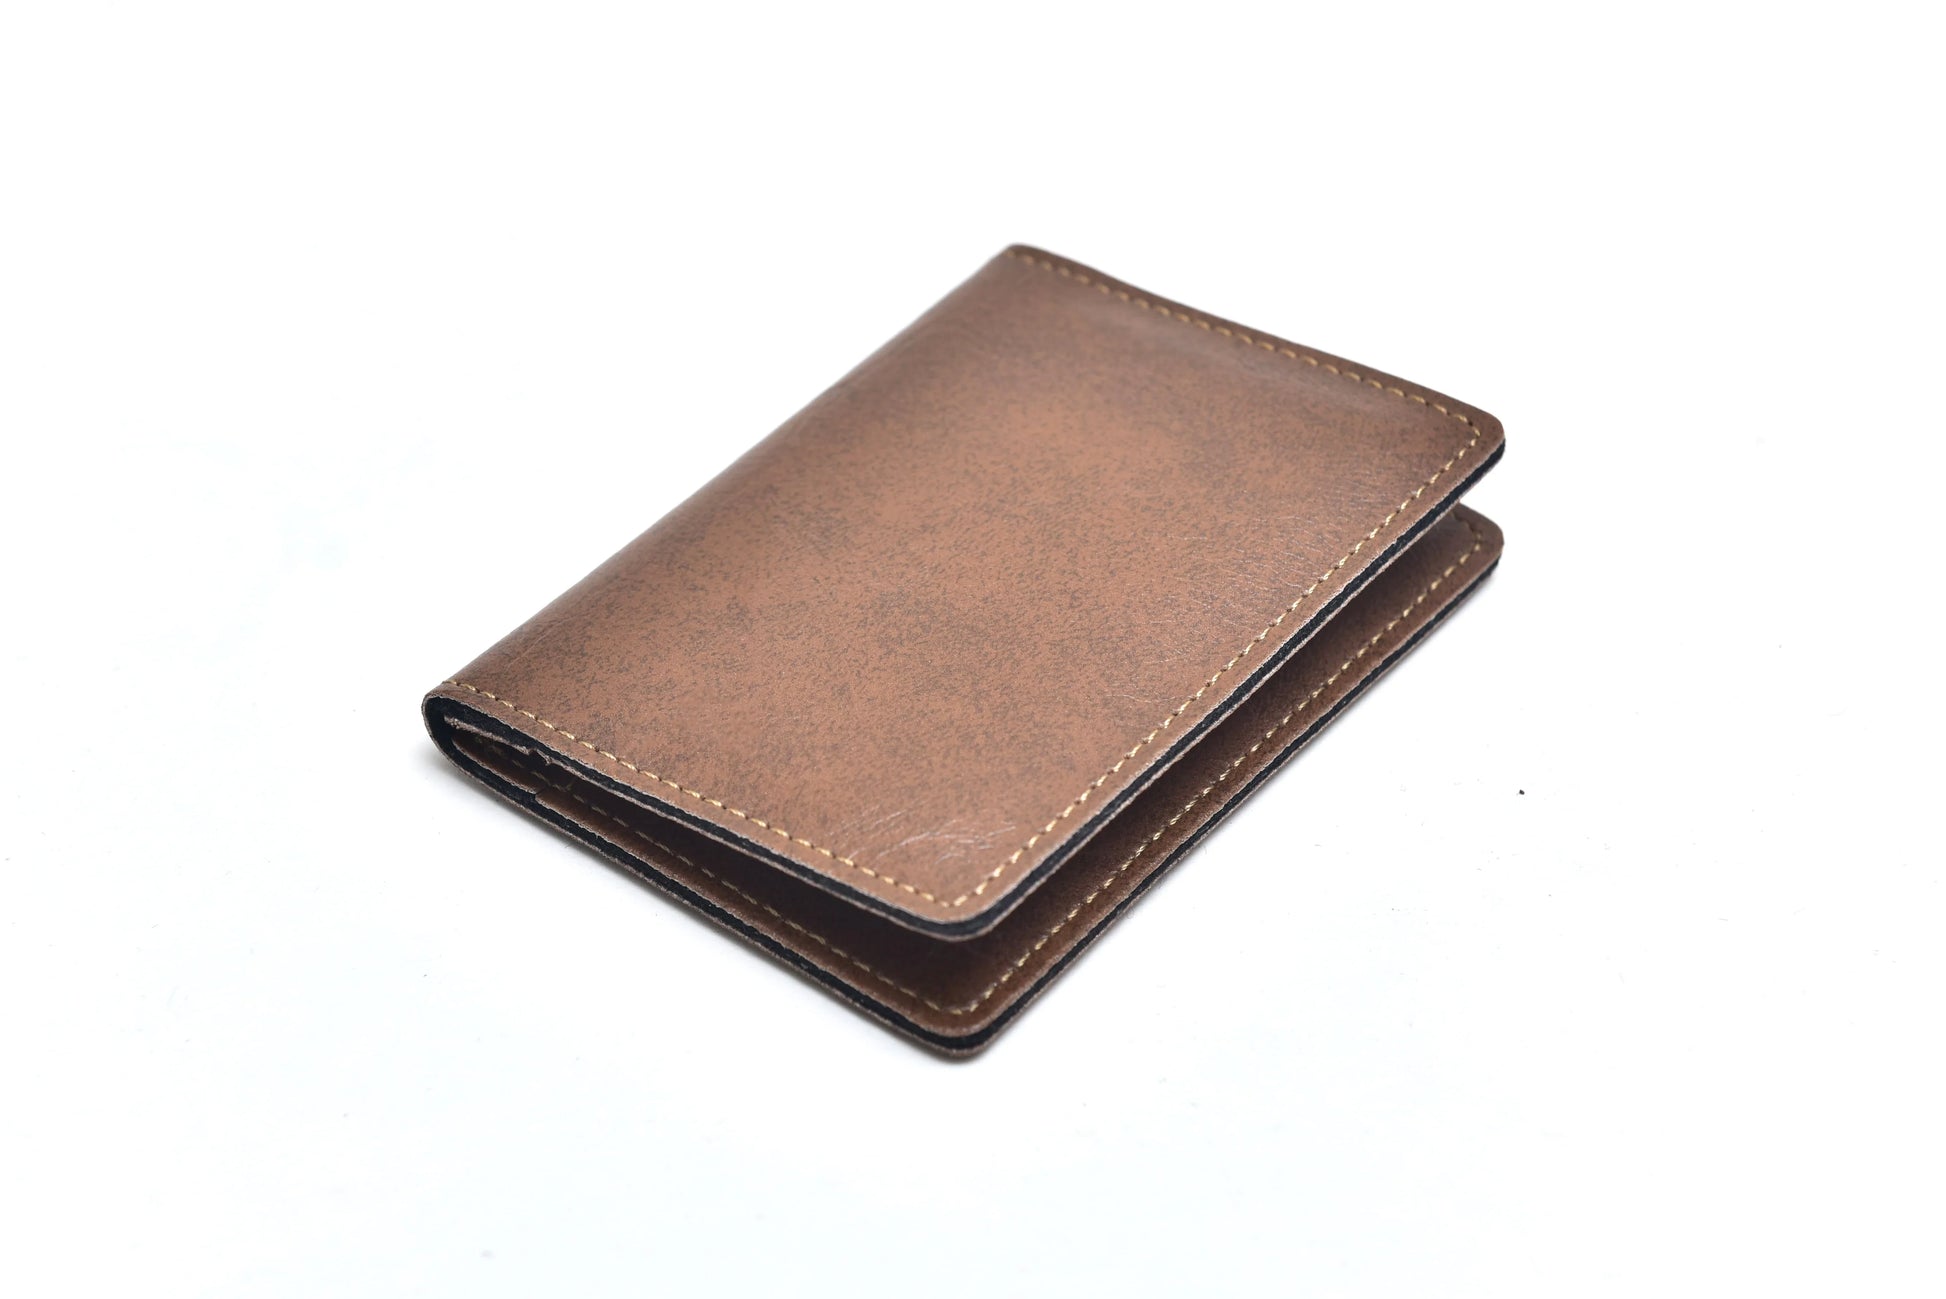 Keep your passport safe and secure with our custom passport cover! Featuring a sleek, modern design and made from top-quality materials, this cover is the perfect choice for anyone looking for a functional and stylish accessory.